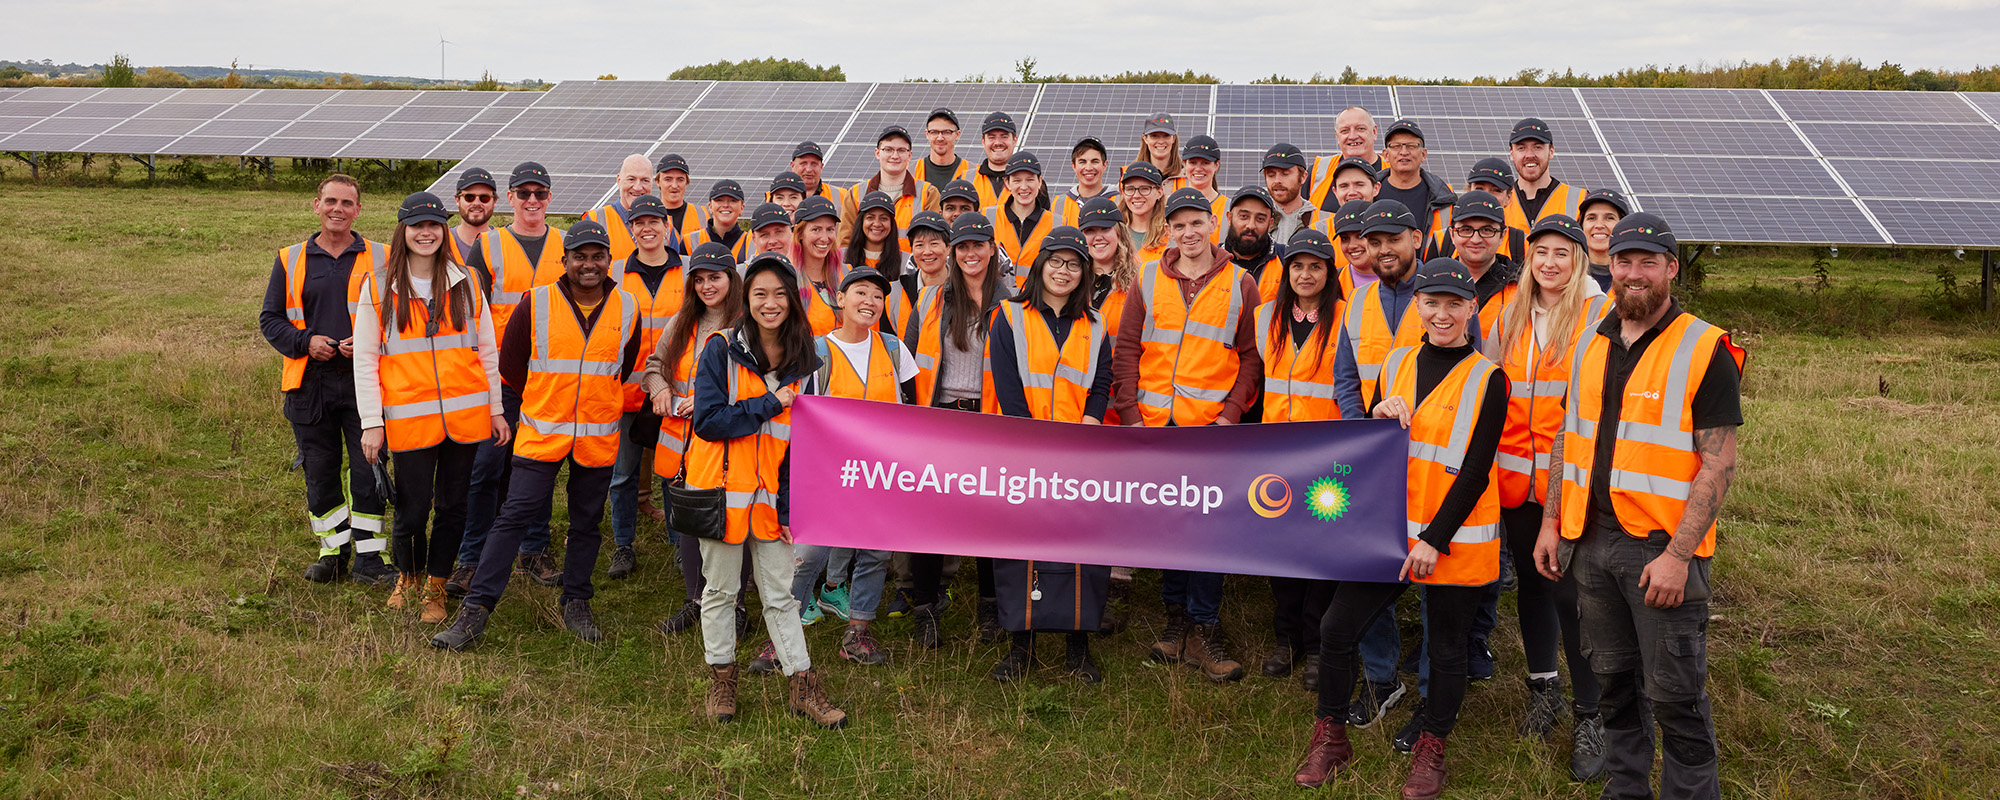 Lightsource bp team members on site holding a banner